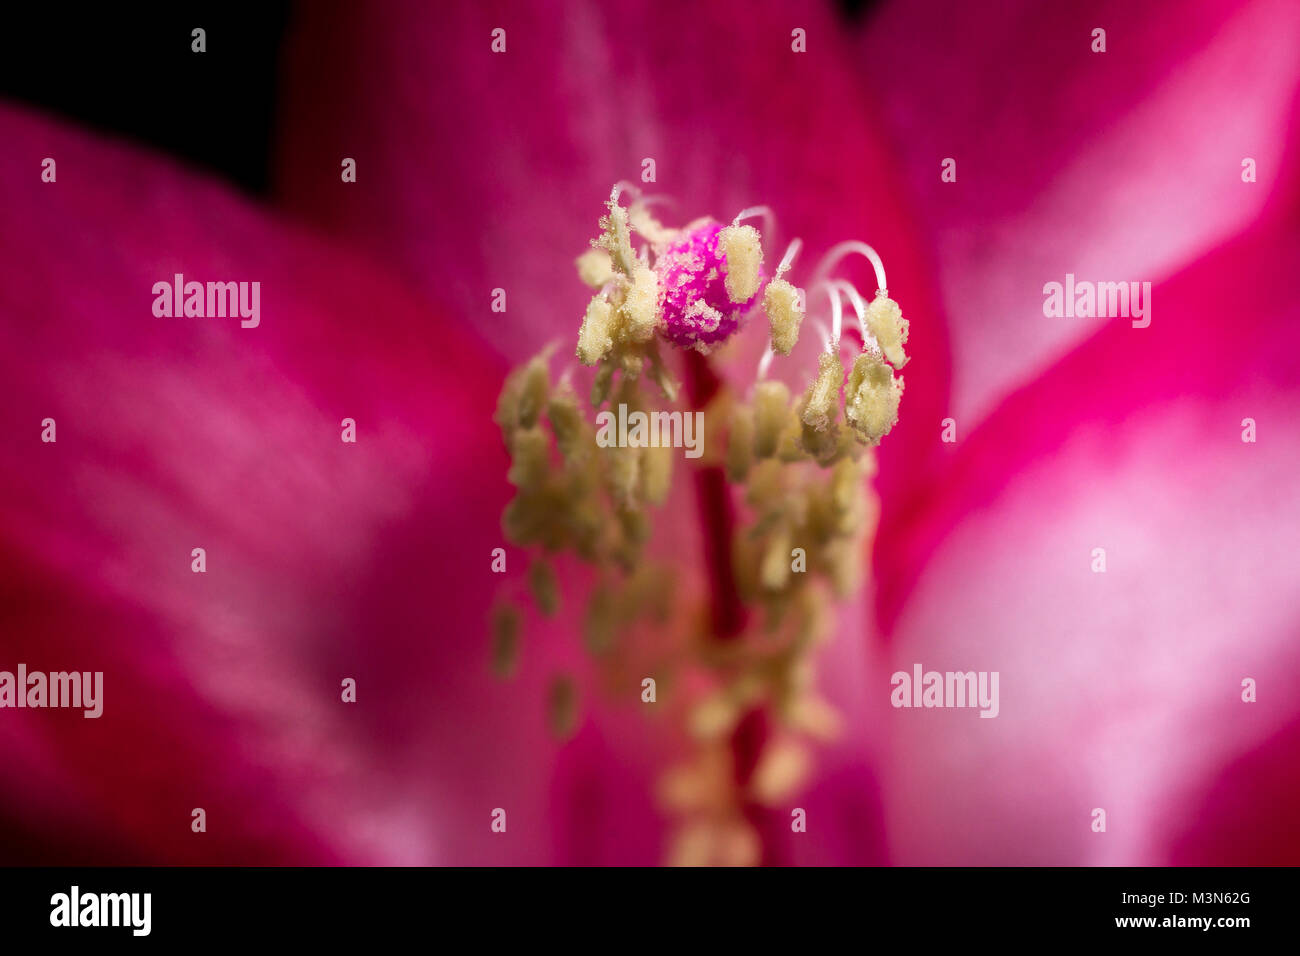 close up of a christmas cactus bloom on a dark background Stock Photo